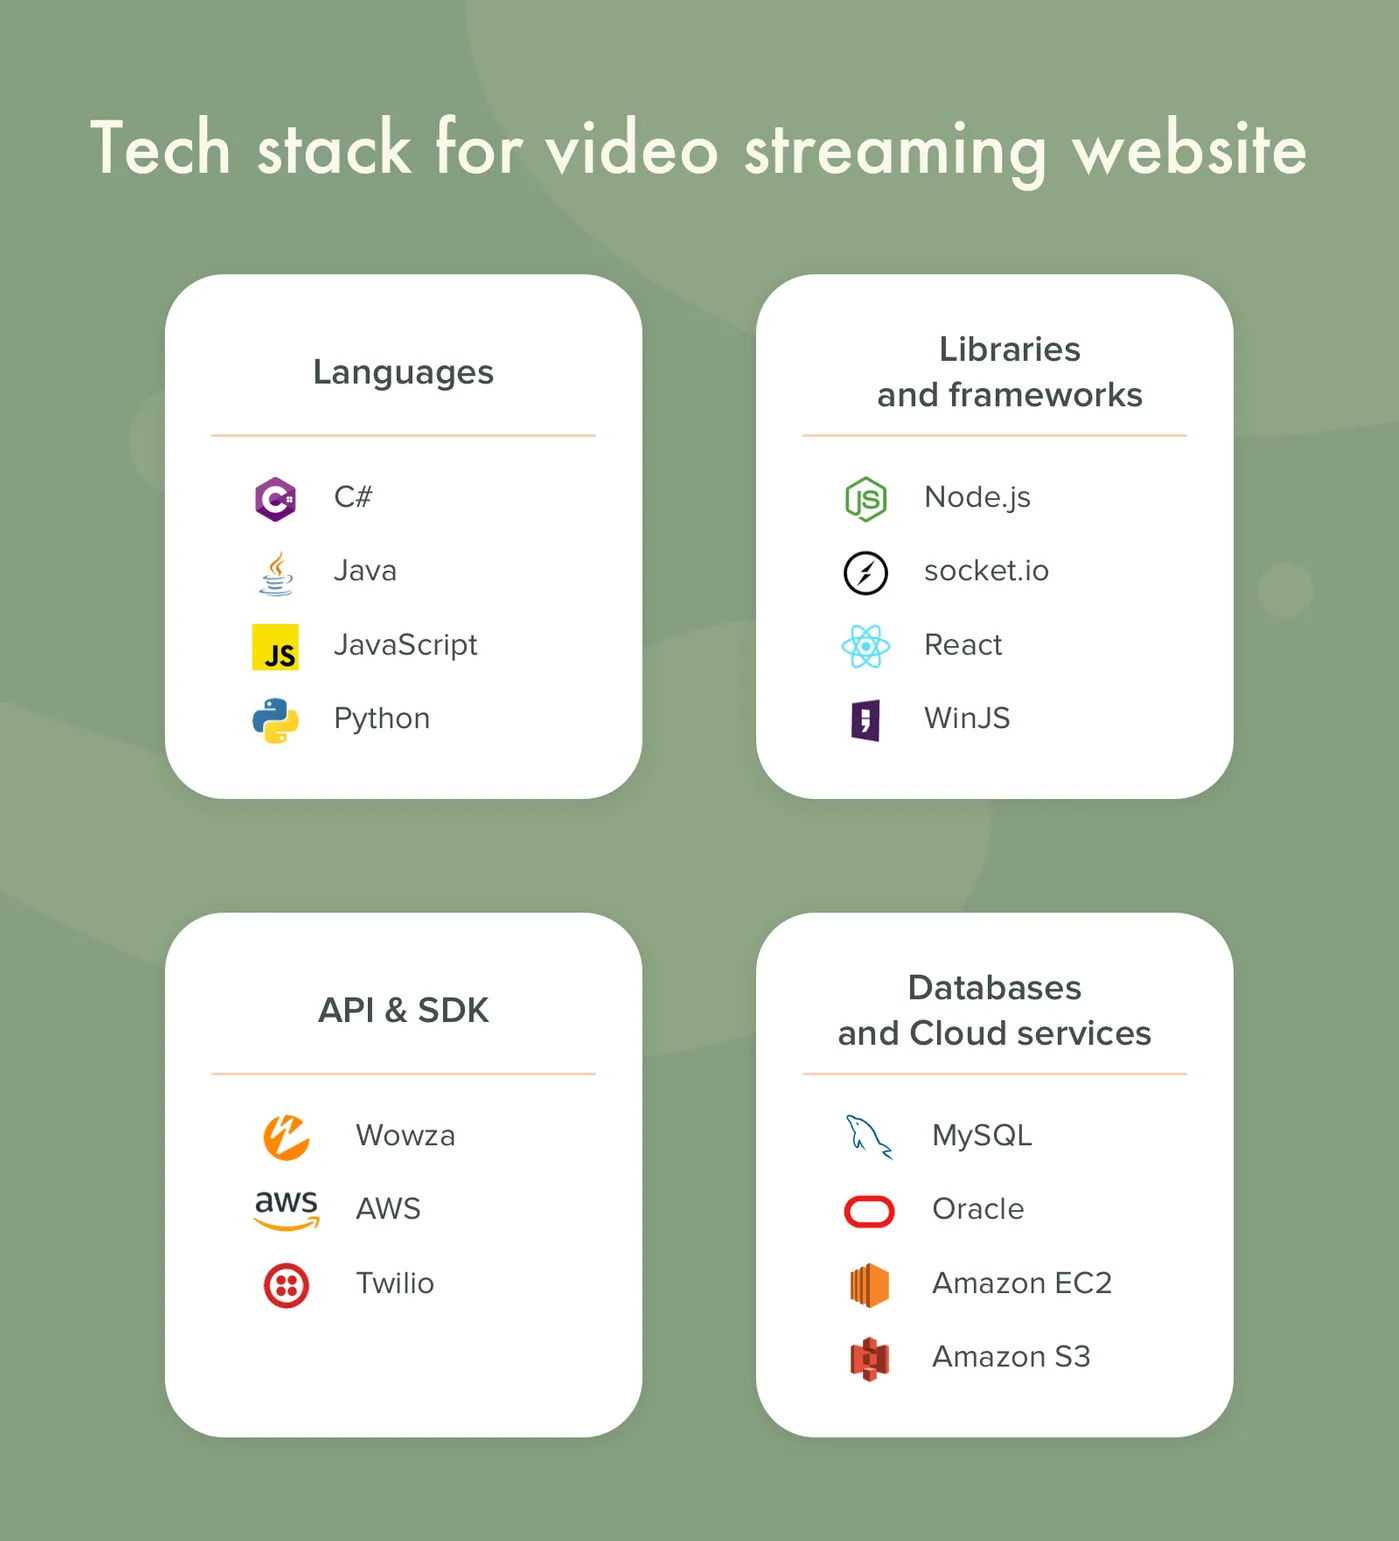 What technologies are used to create a video streaming website